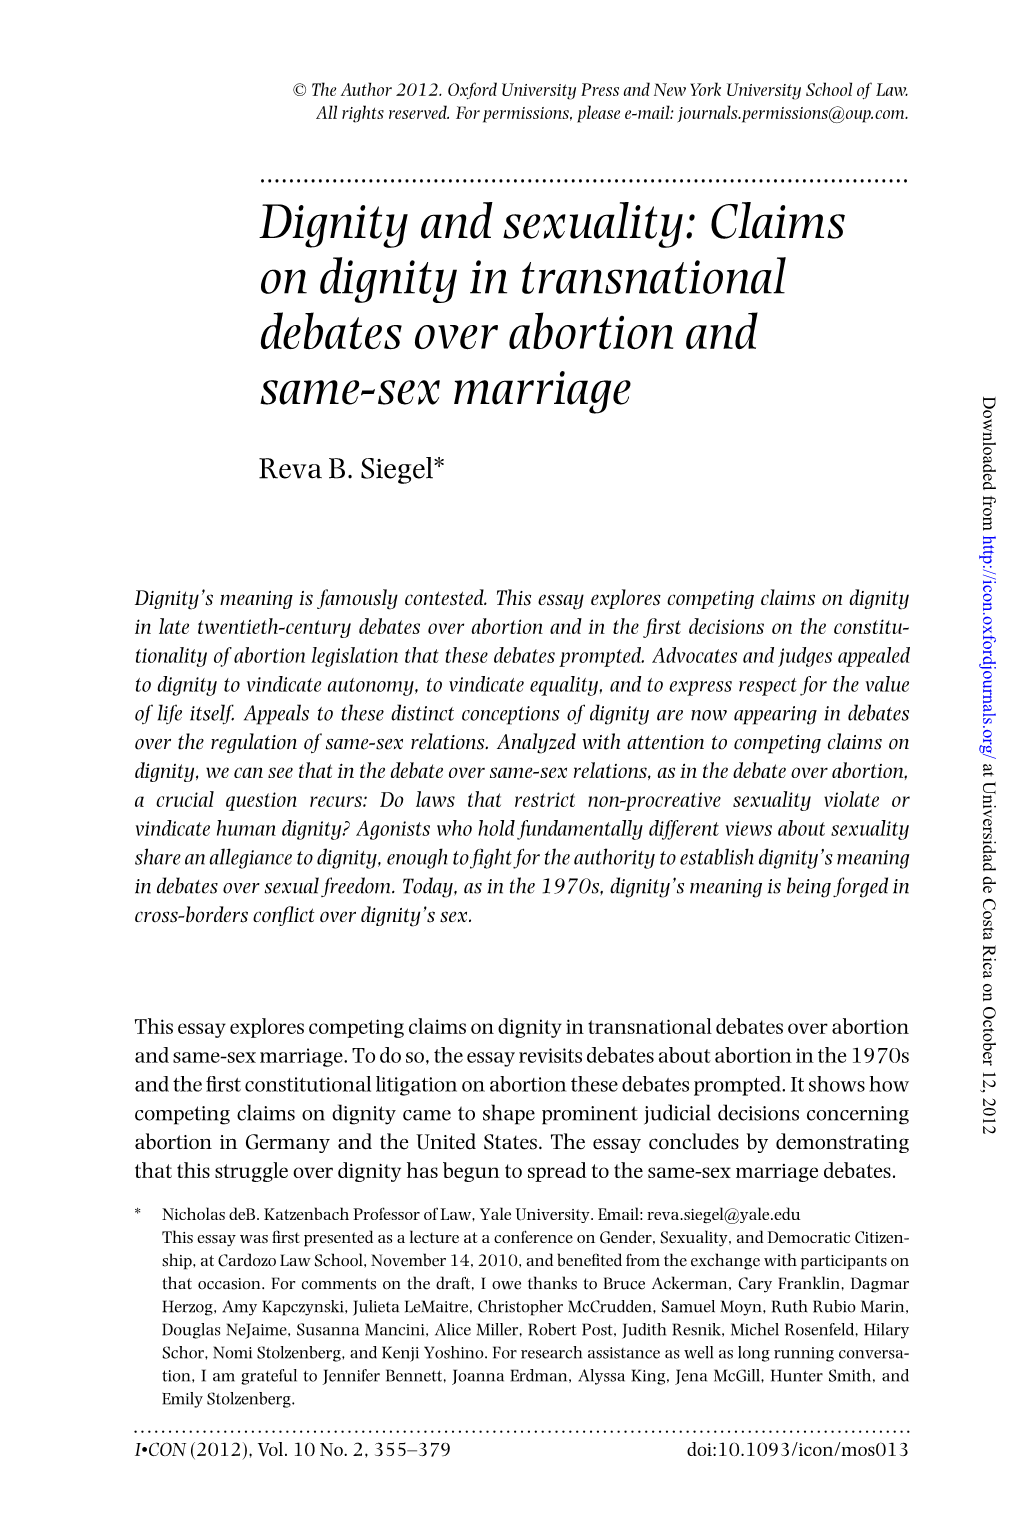 Claims on Dignity in Transnational Debates Over Abortion and Same-Sex Marriage